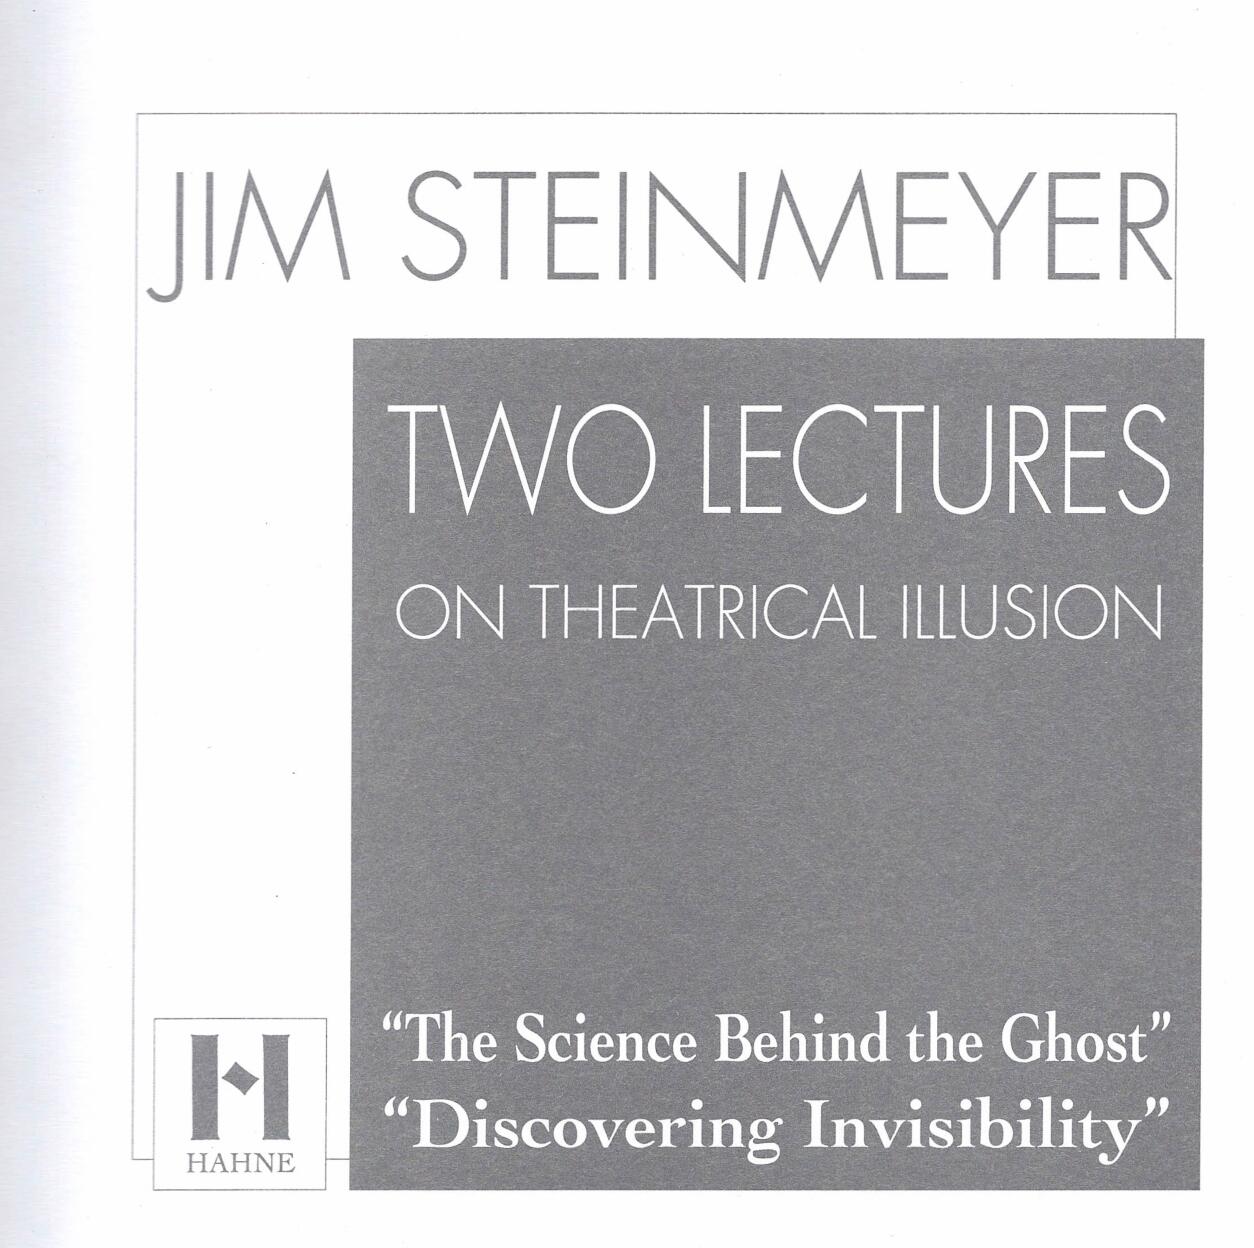 Jim Steinmeyer - Two Lectures On Theatrical Illusion